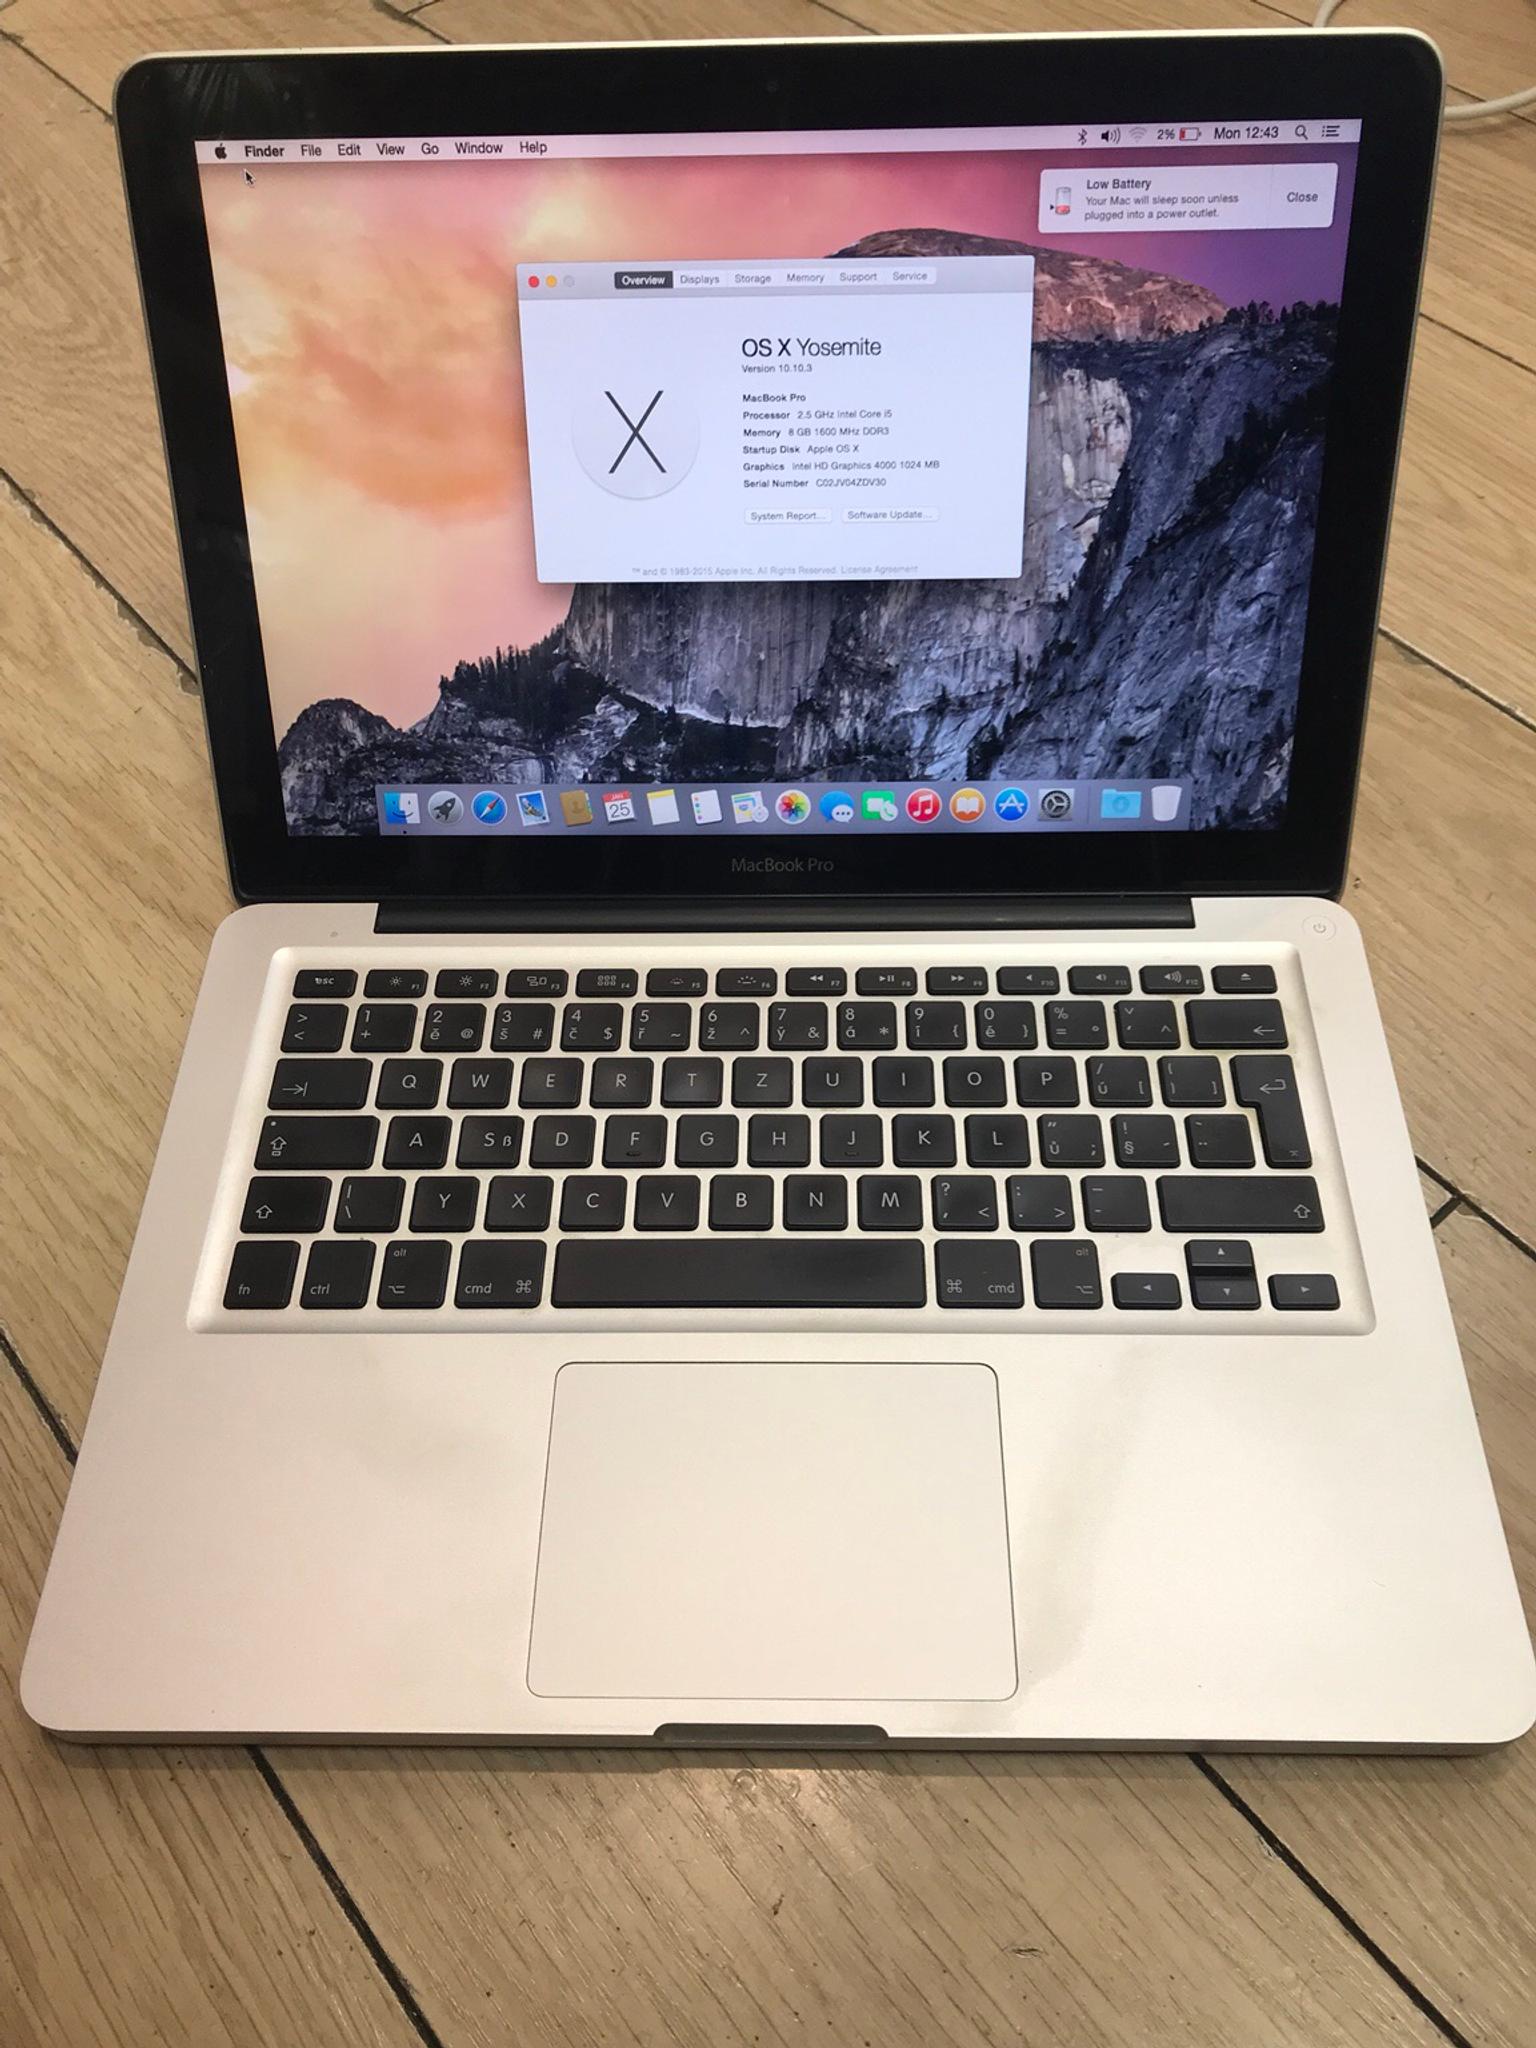 Apple Macbook Pro 13 Inch Mid 12 8gb Ram In L1 Liverpool For 450 00 For Sale Shpock